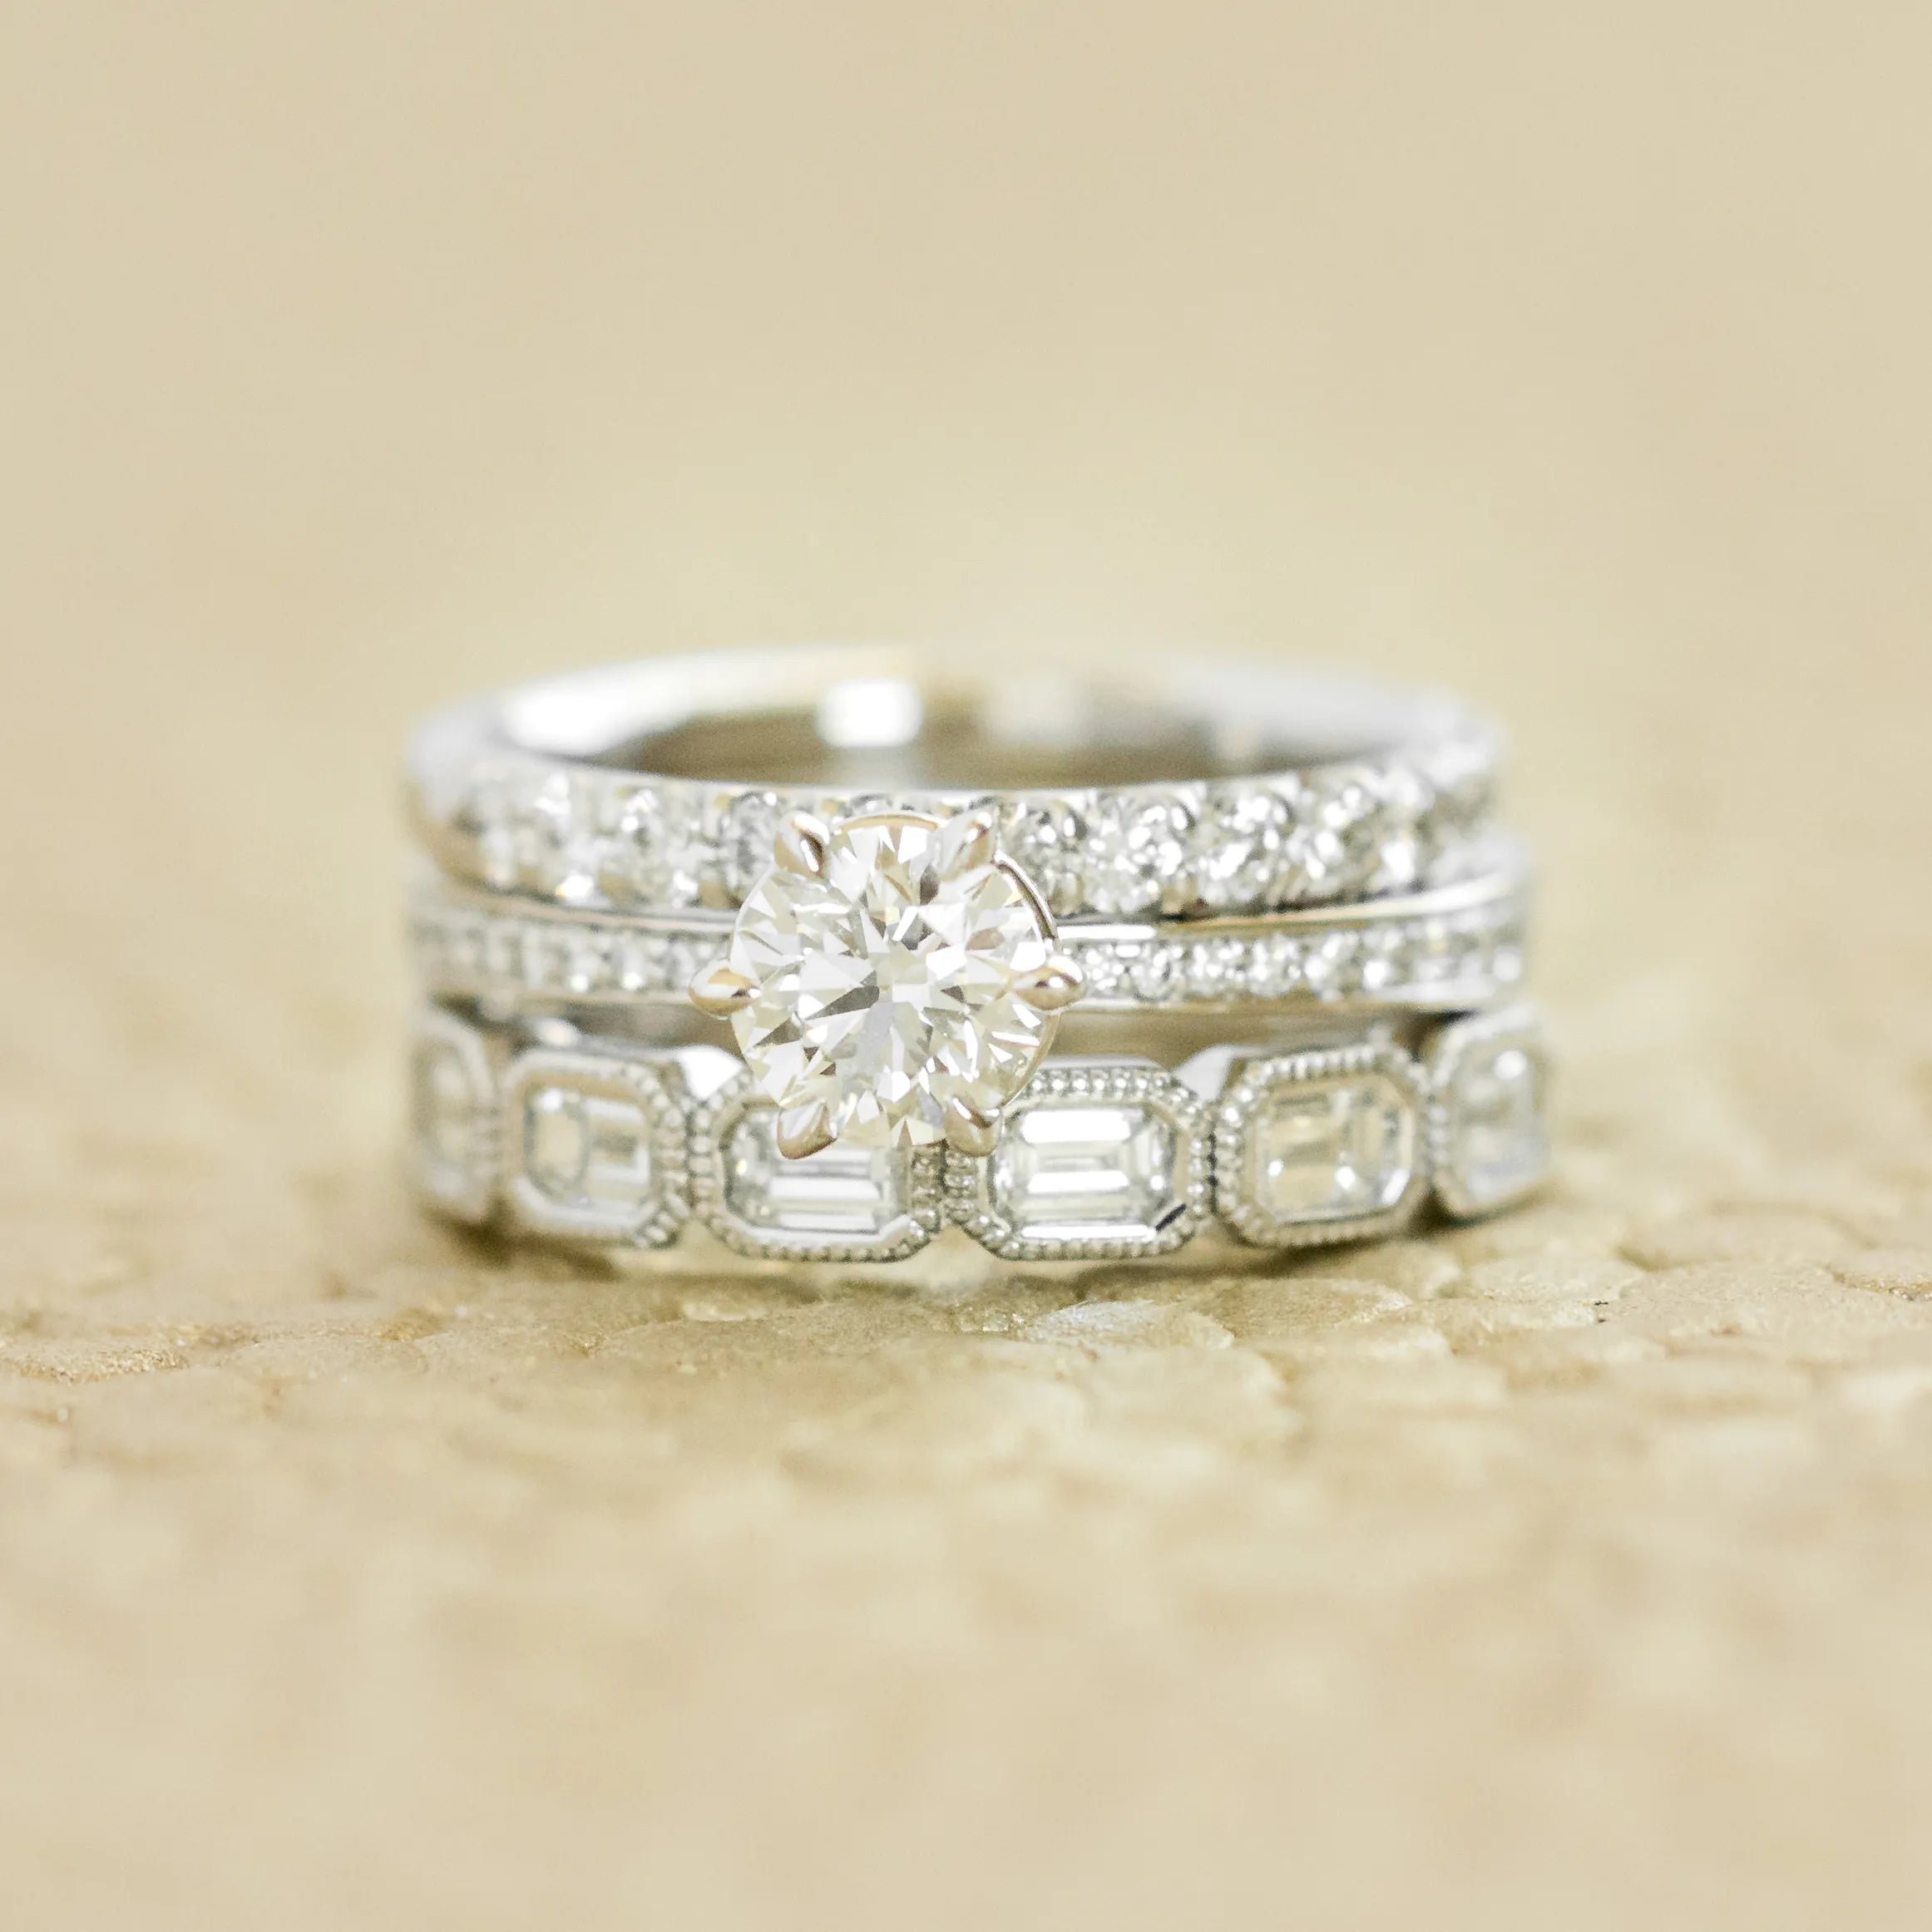 The Best Way to Personalize Your Wedding Rings